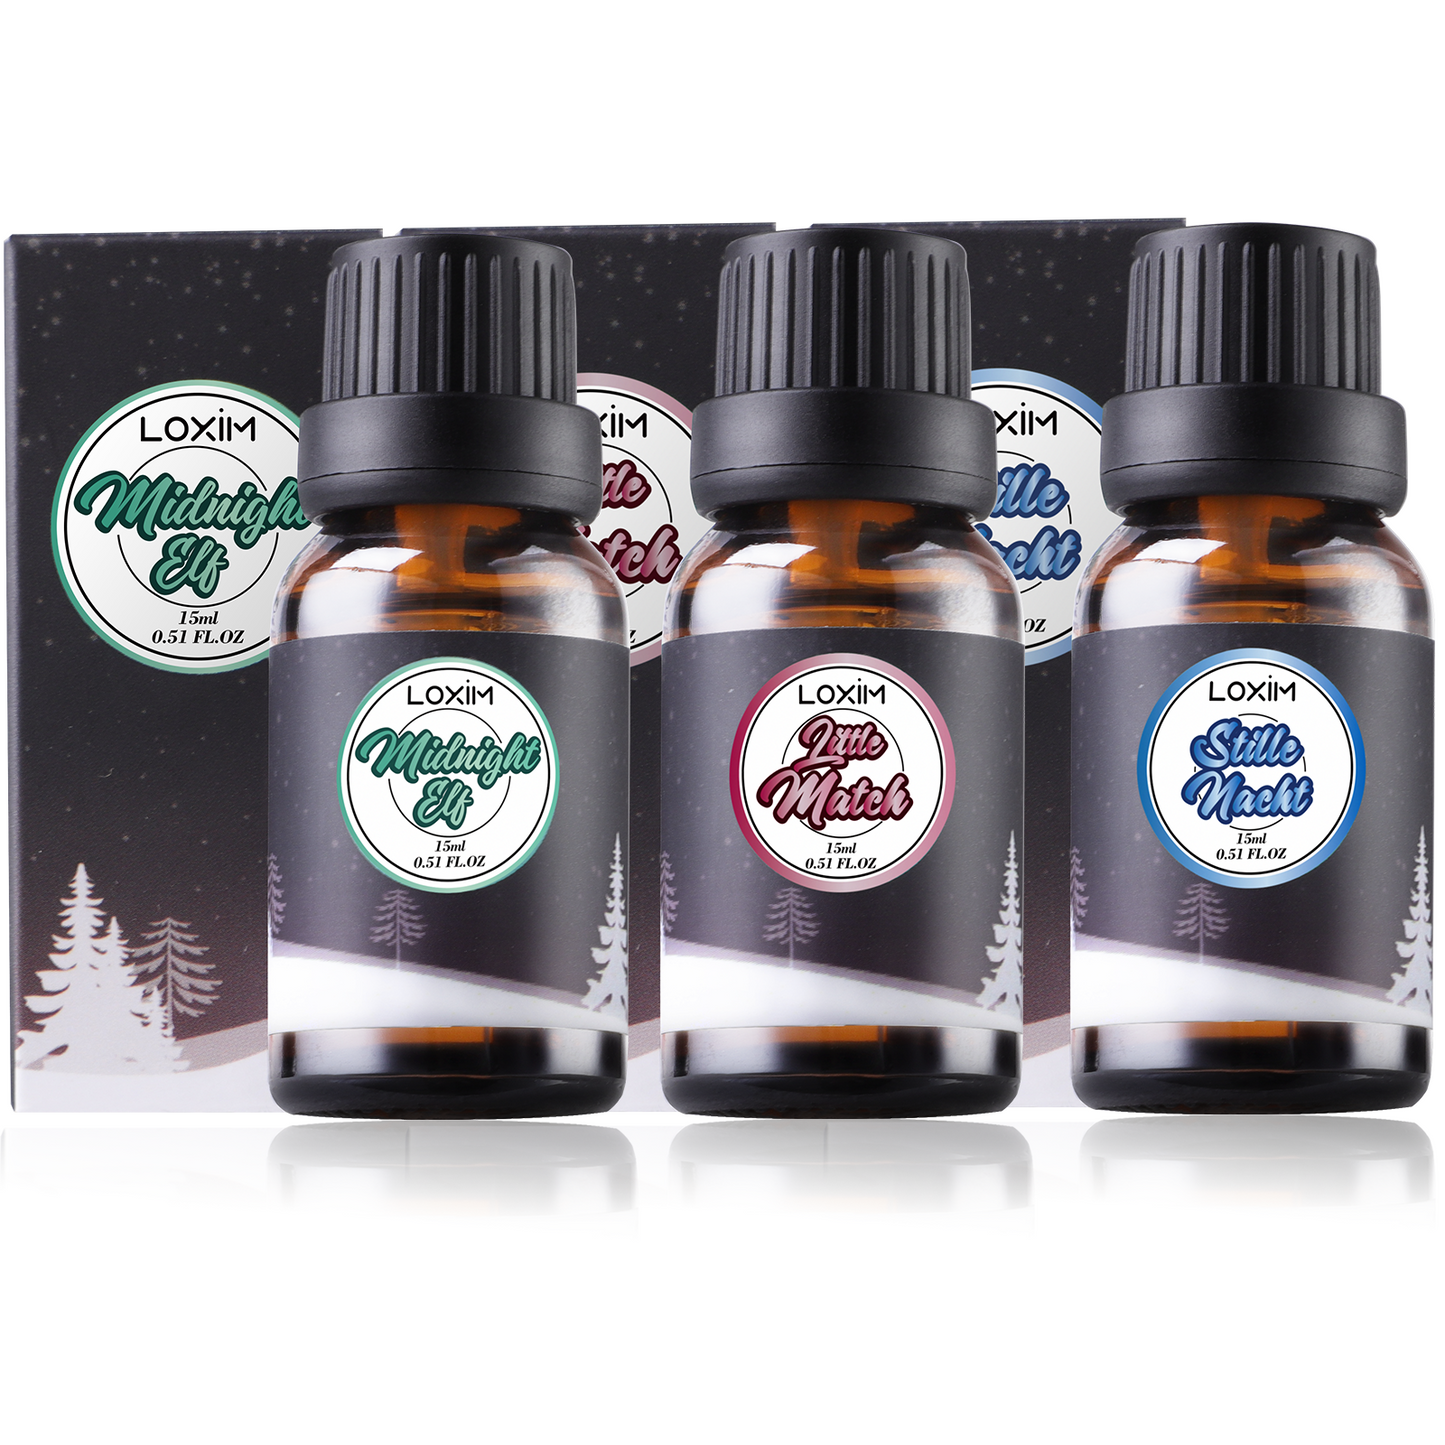 LOXIM Snow Tales Essential Oil Set of 3 (100% Pure & Natural) Therapeutic Grade Fragrance Oils for Aromatherapy Diffuser, Holiday Essential Oils, Home Fragrance Products